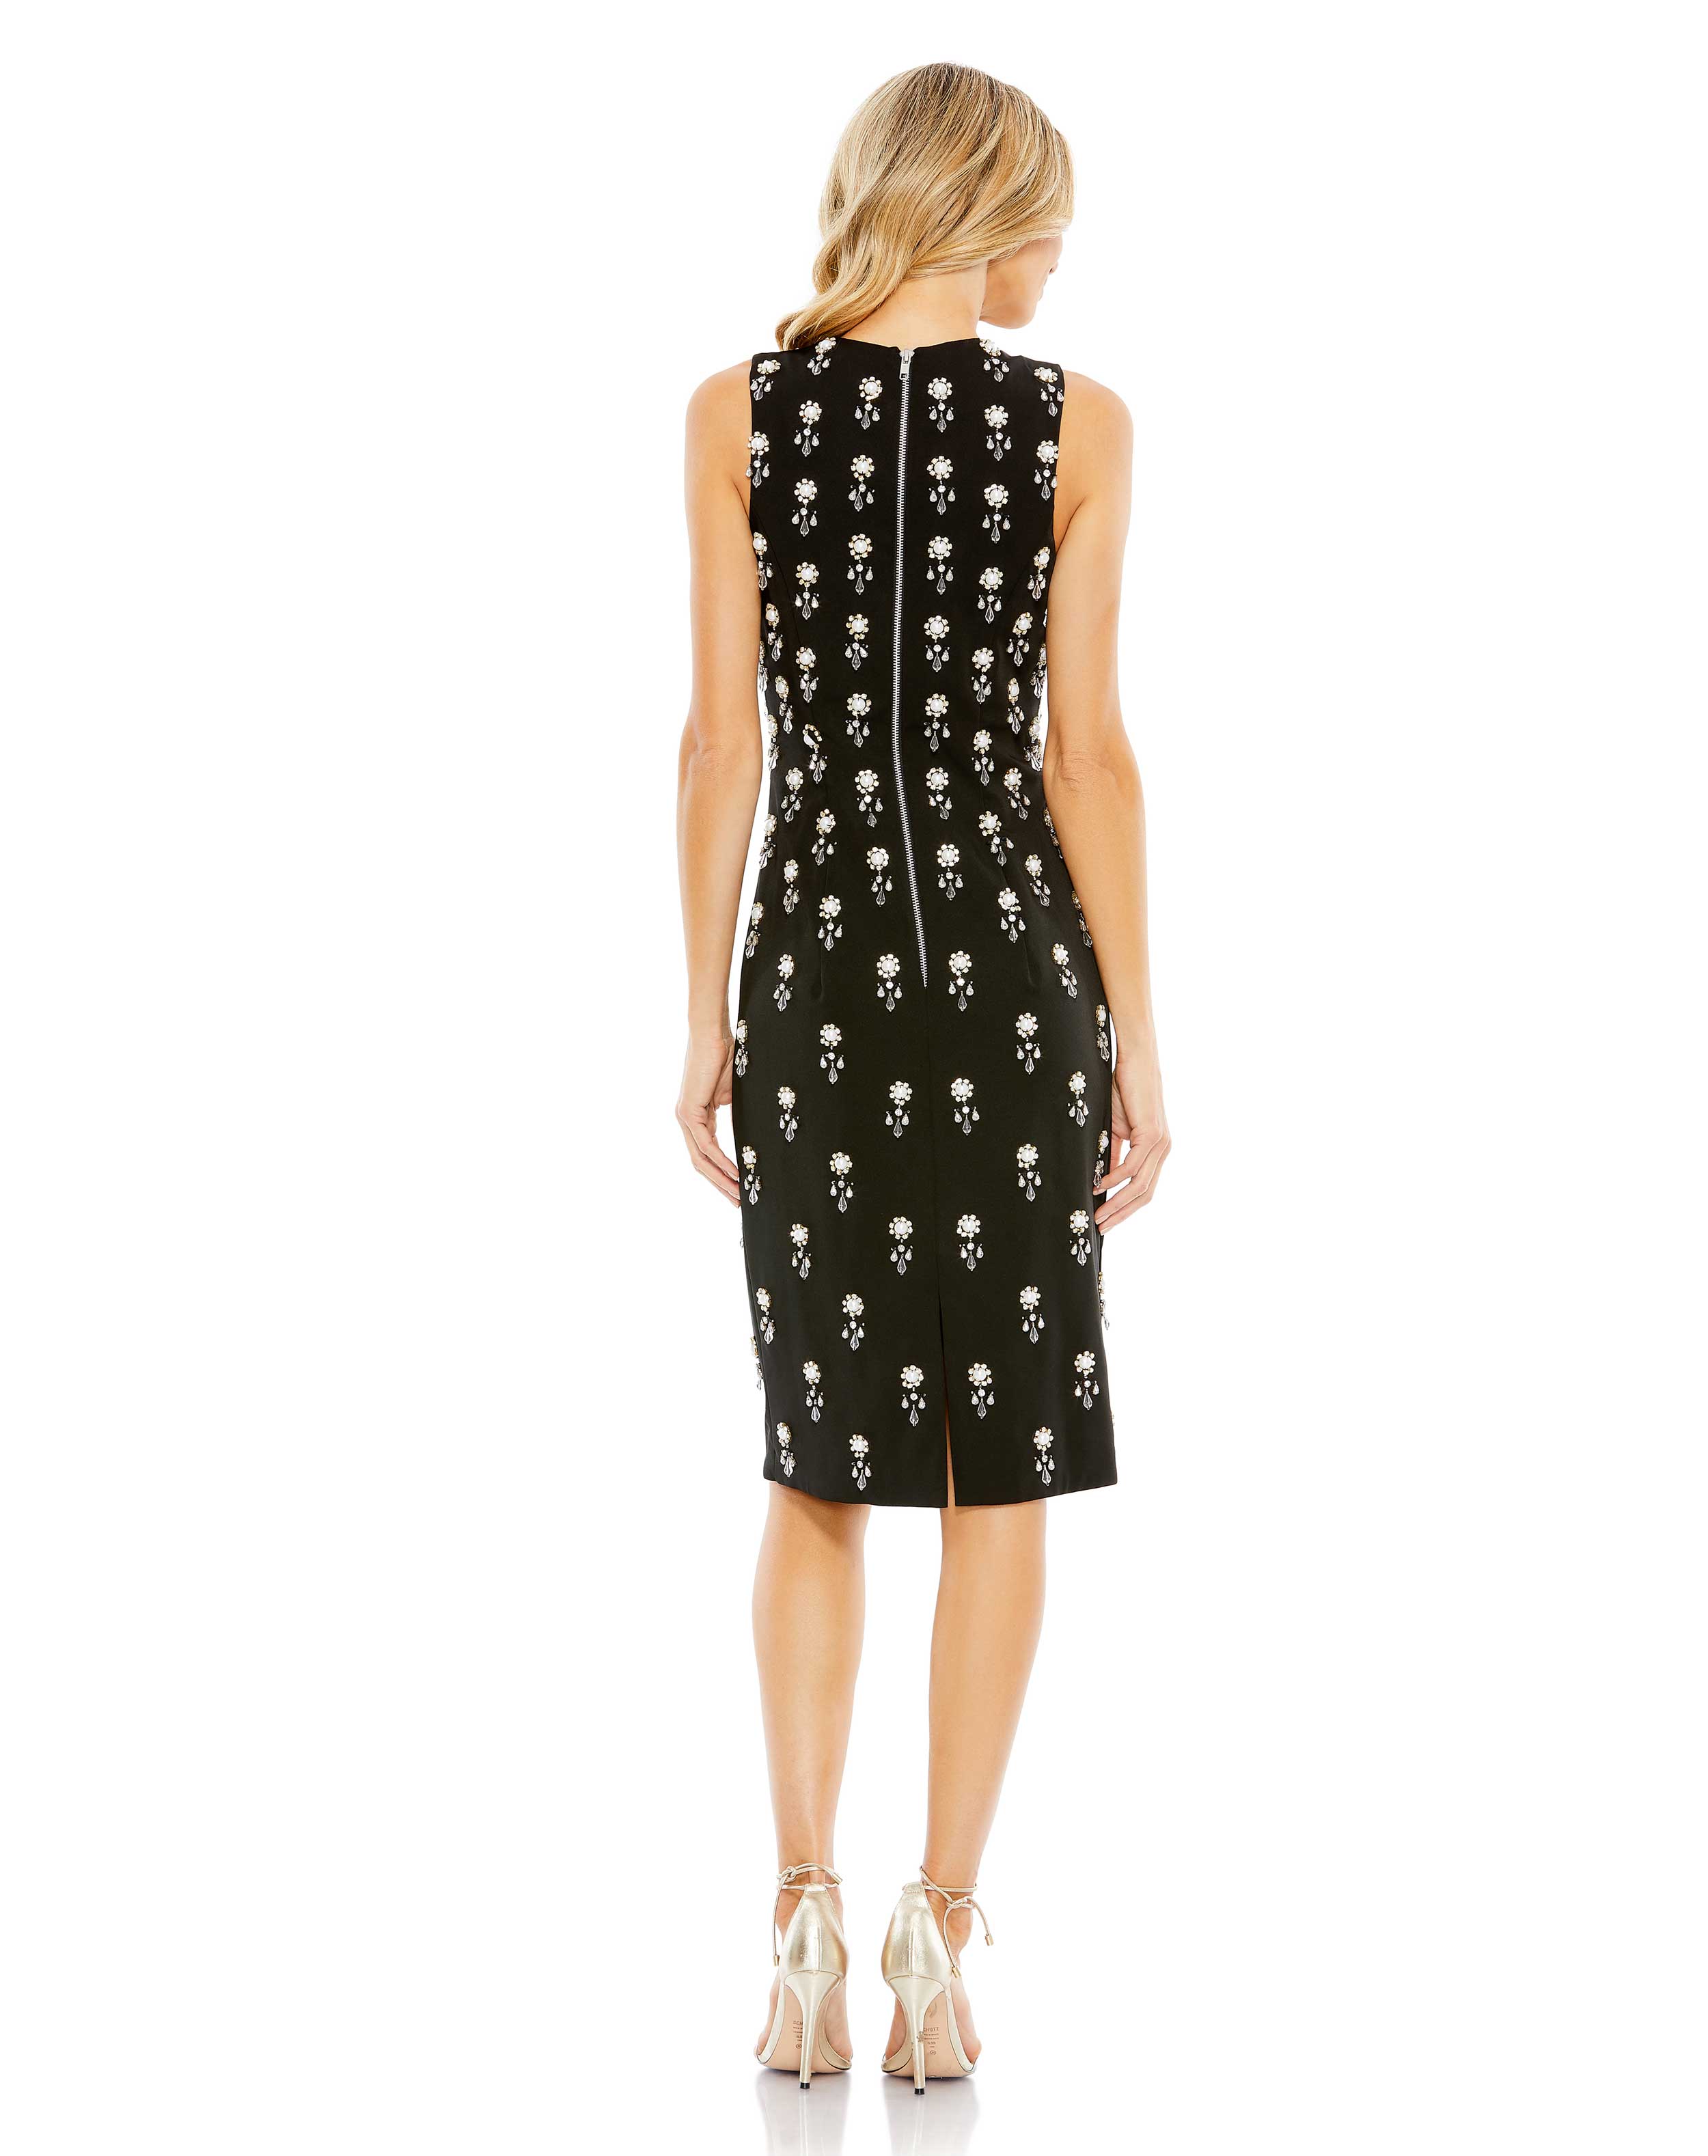 Embellished Sleeveless Fitted Cocktail Dress - FINAL SALE